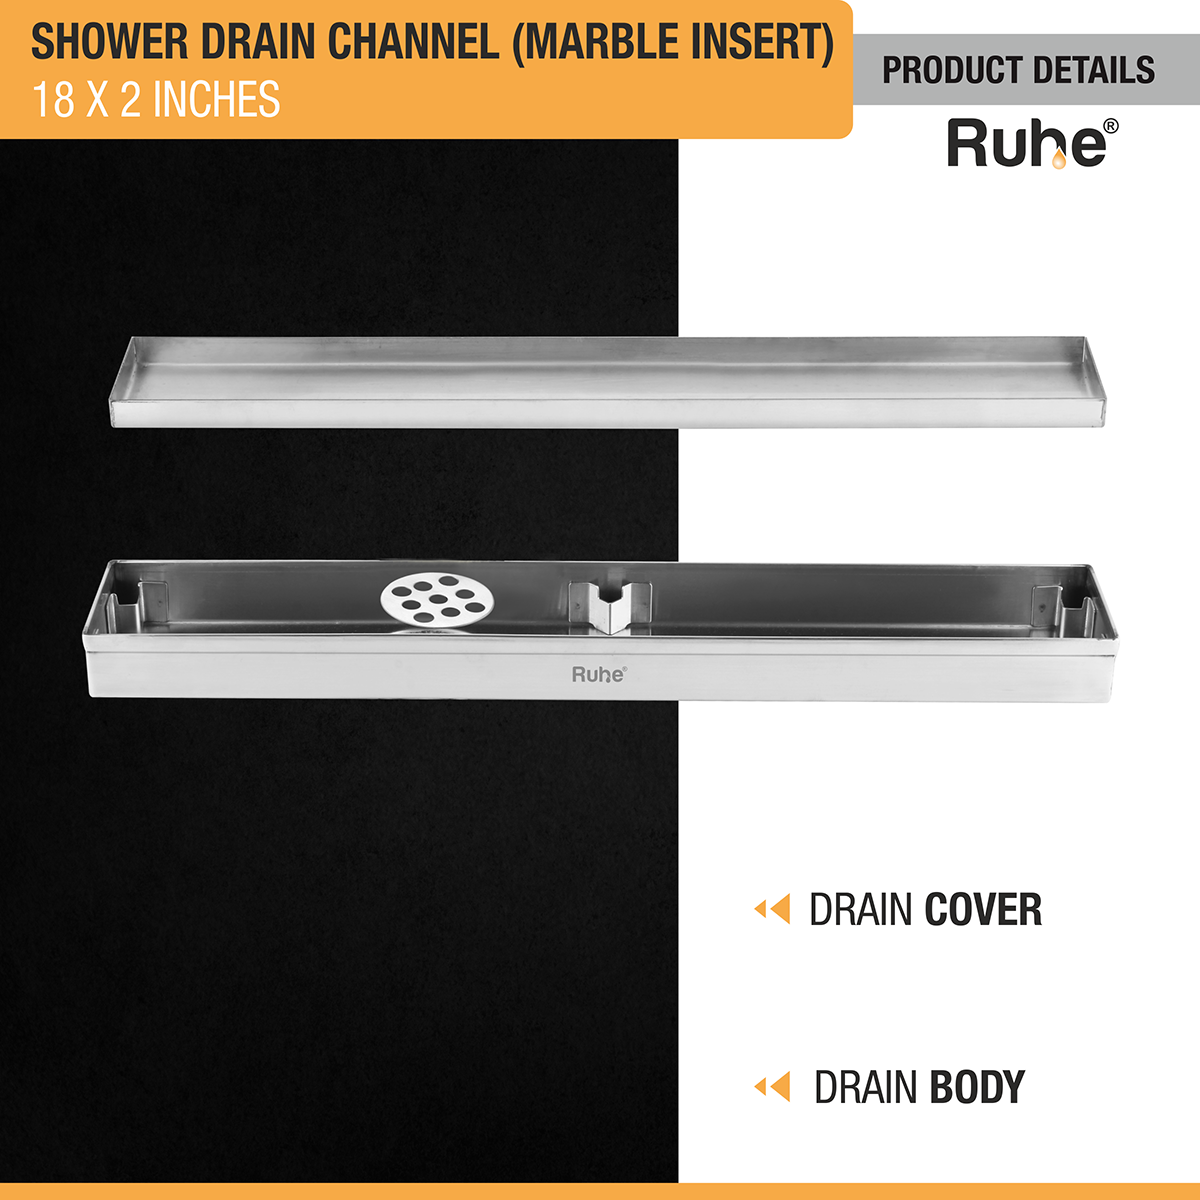 Marble Insert Shower Drain Channel (18 x 2 Inches) (304 Grade) with drain cover and drain body